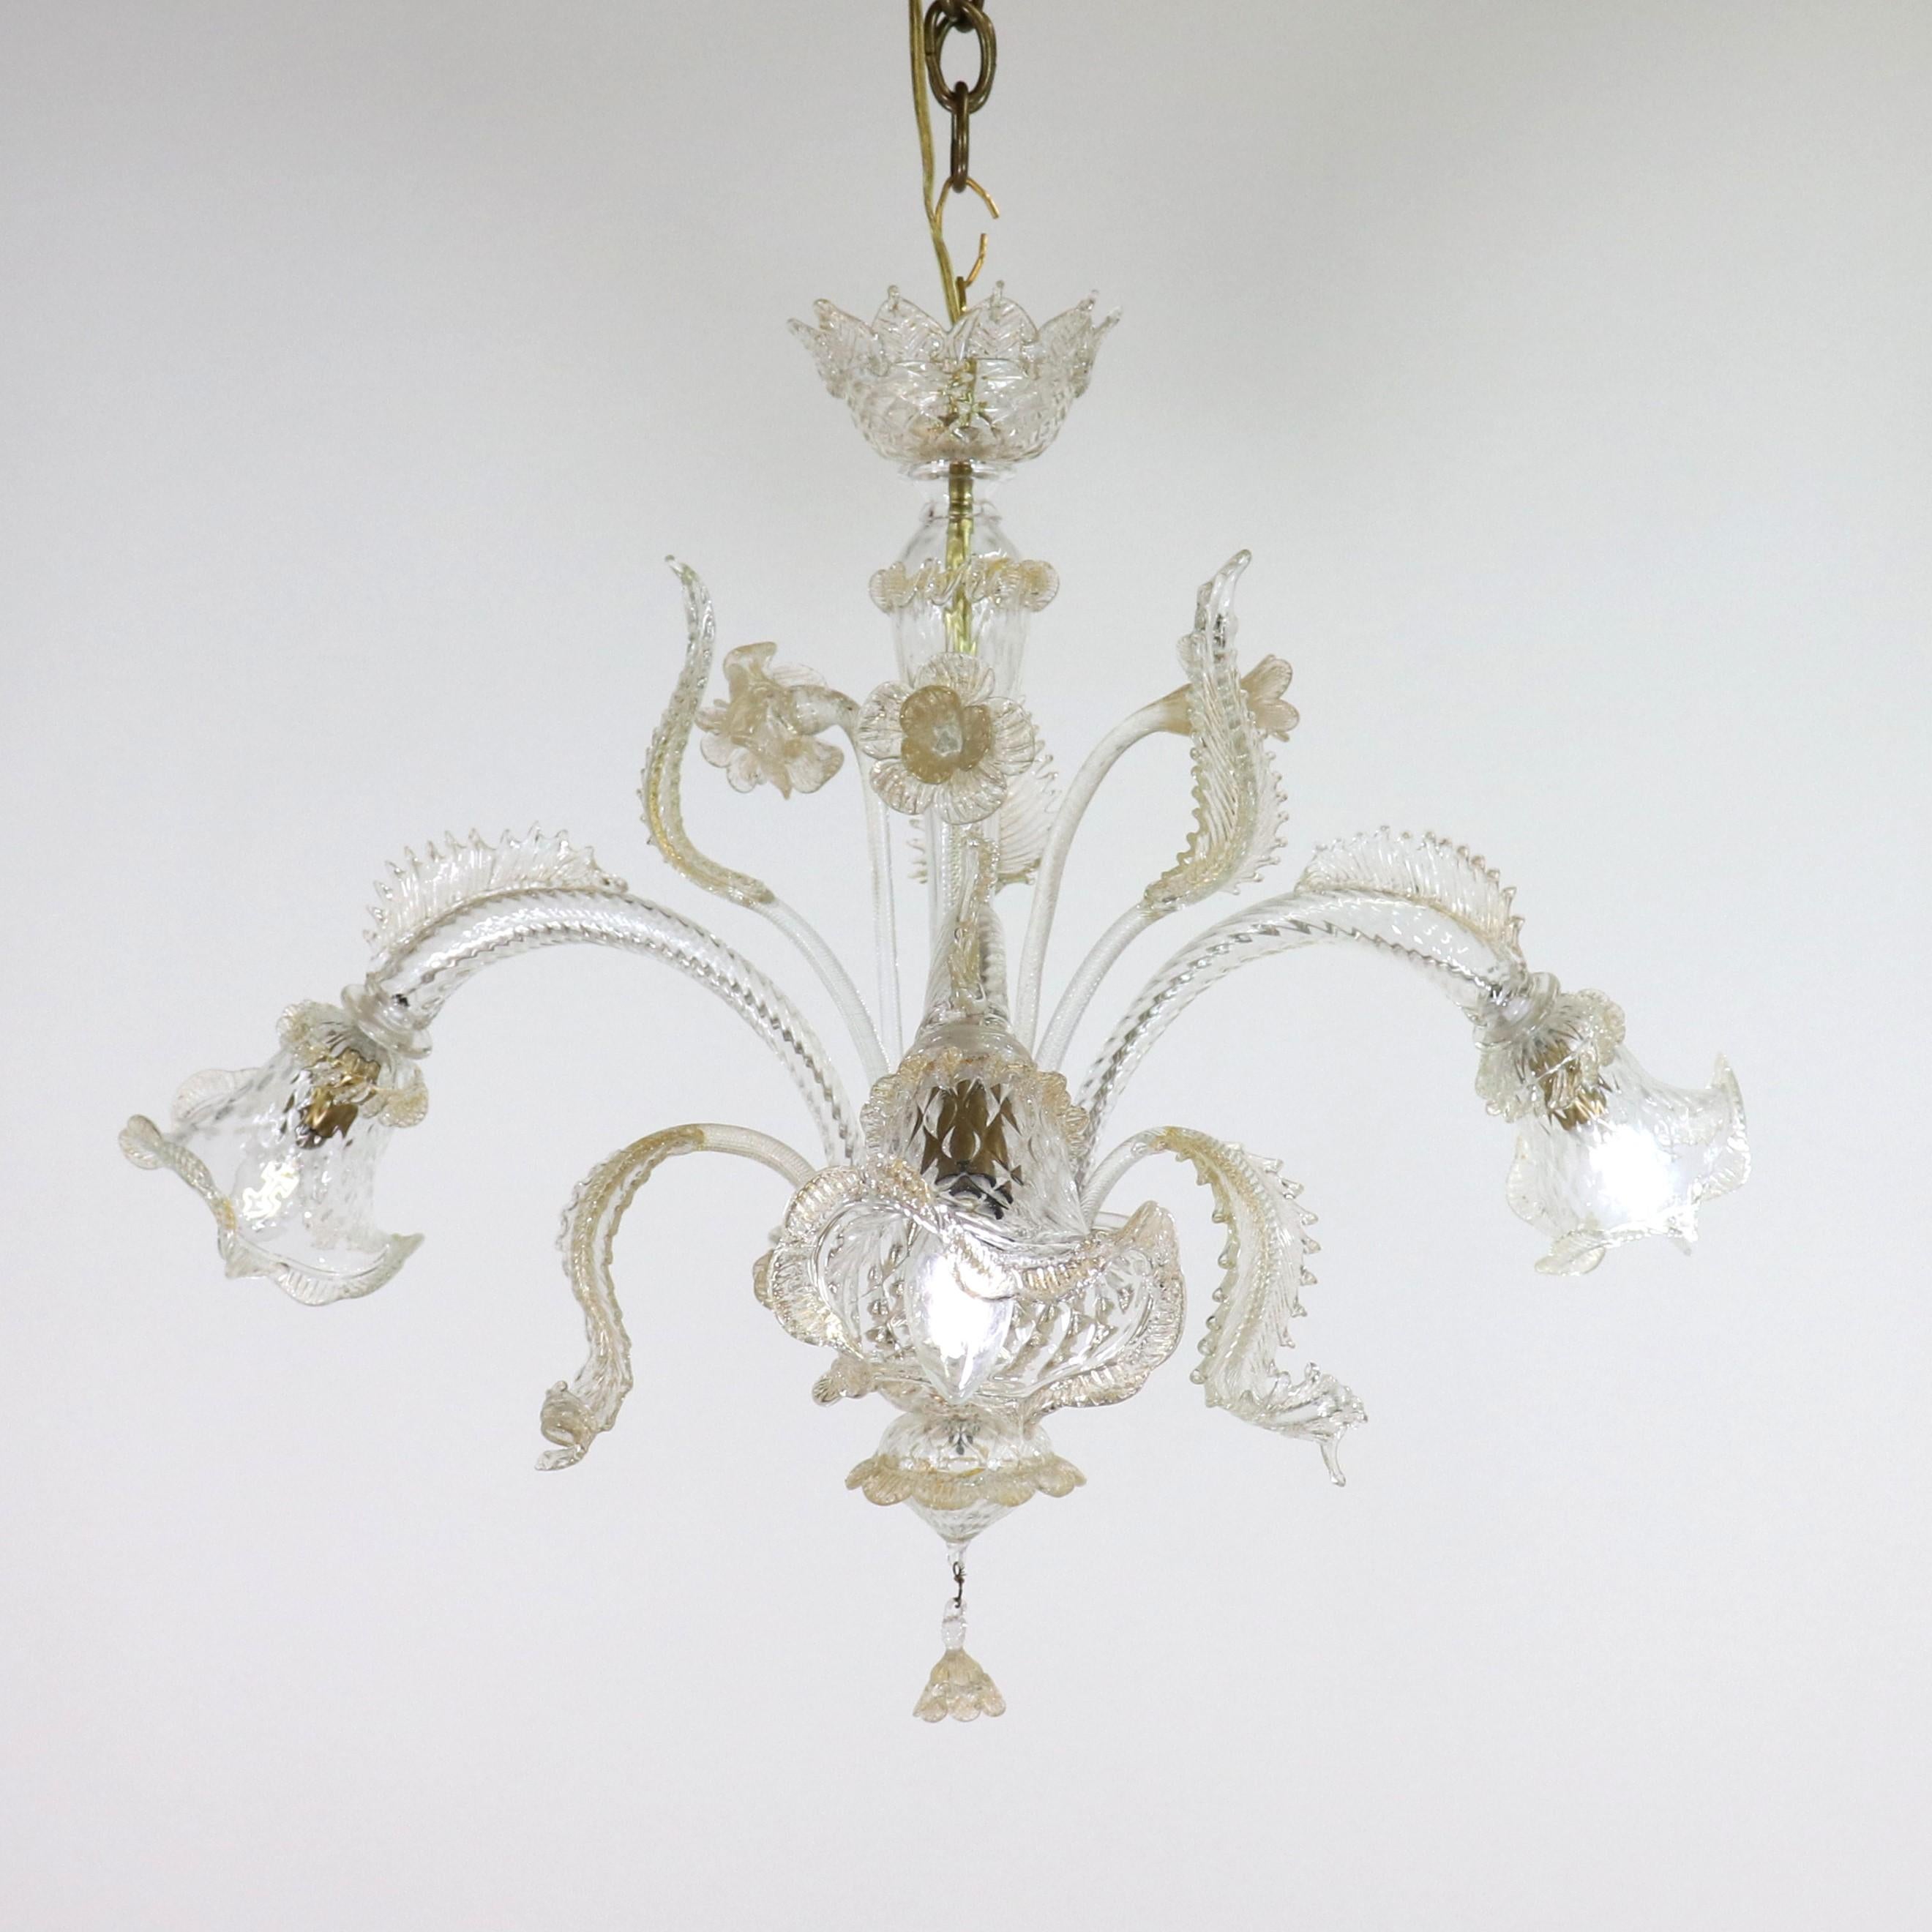 This exquisite, small handcrafted Murano chandelier features gold-infused cristallo glass, adding a touch of elegance to any space. It boasts three gracefully curved scroll arms, each culminating in tri-lobed cups. The timeless Baroque-style floral